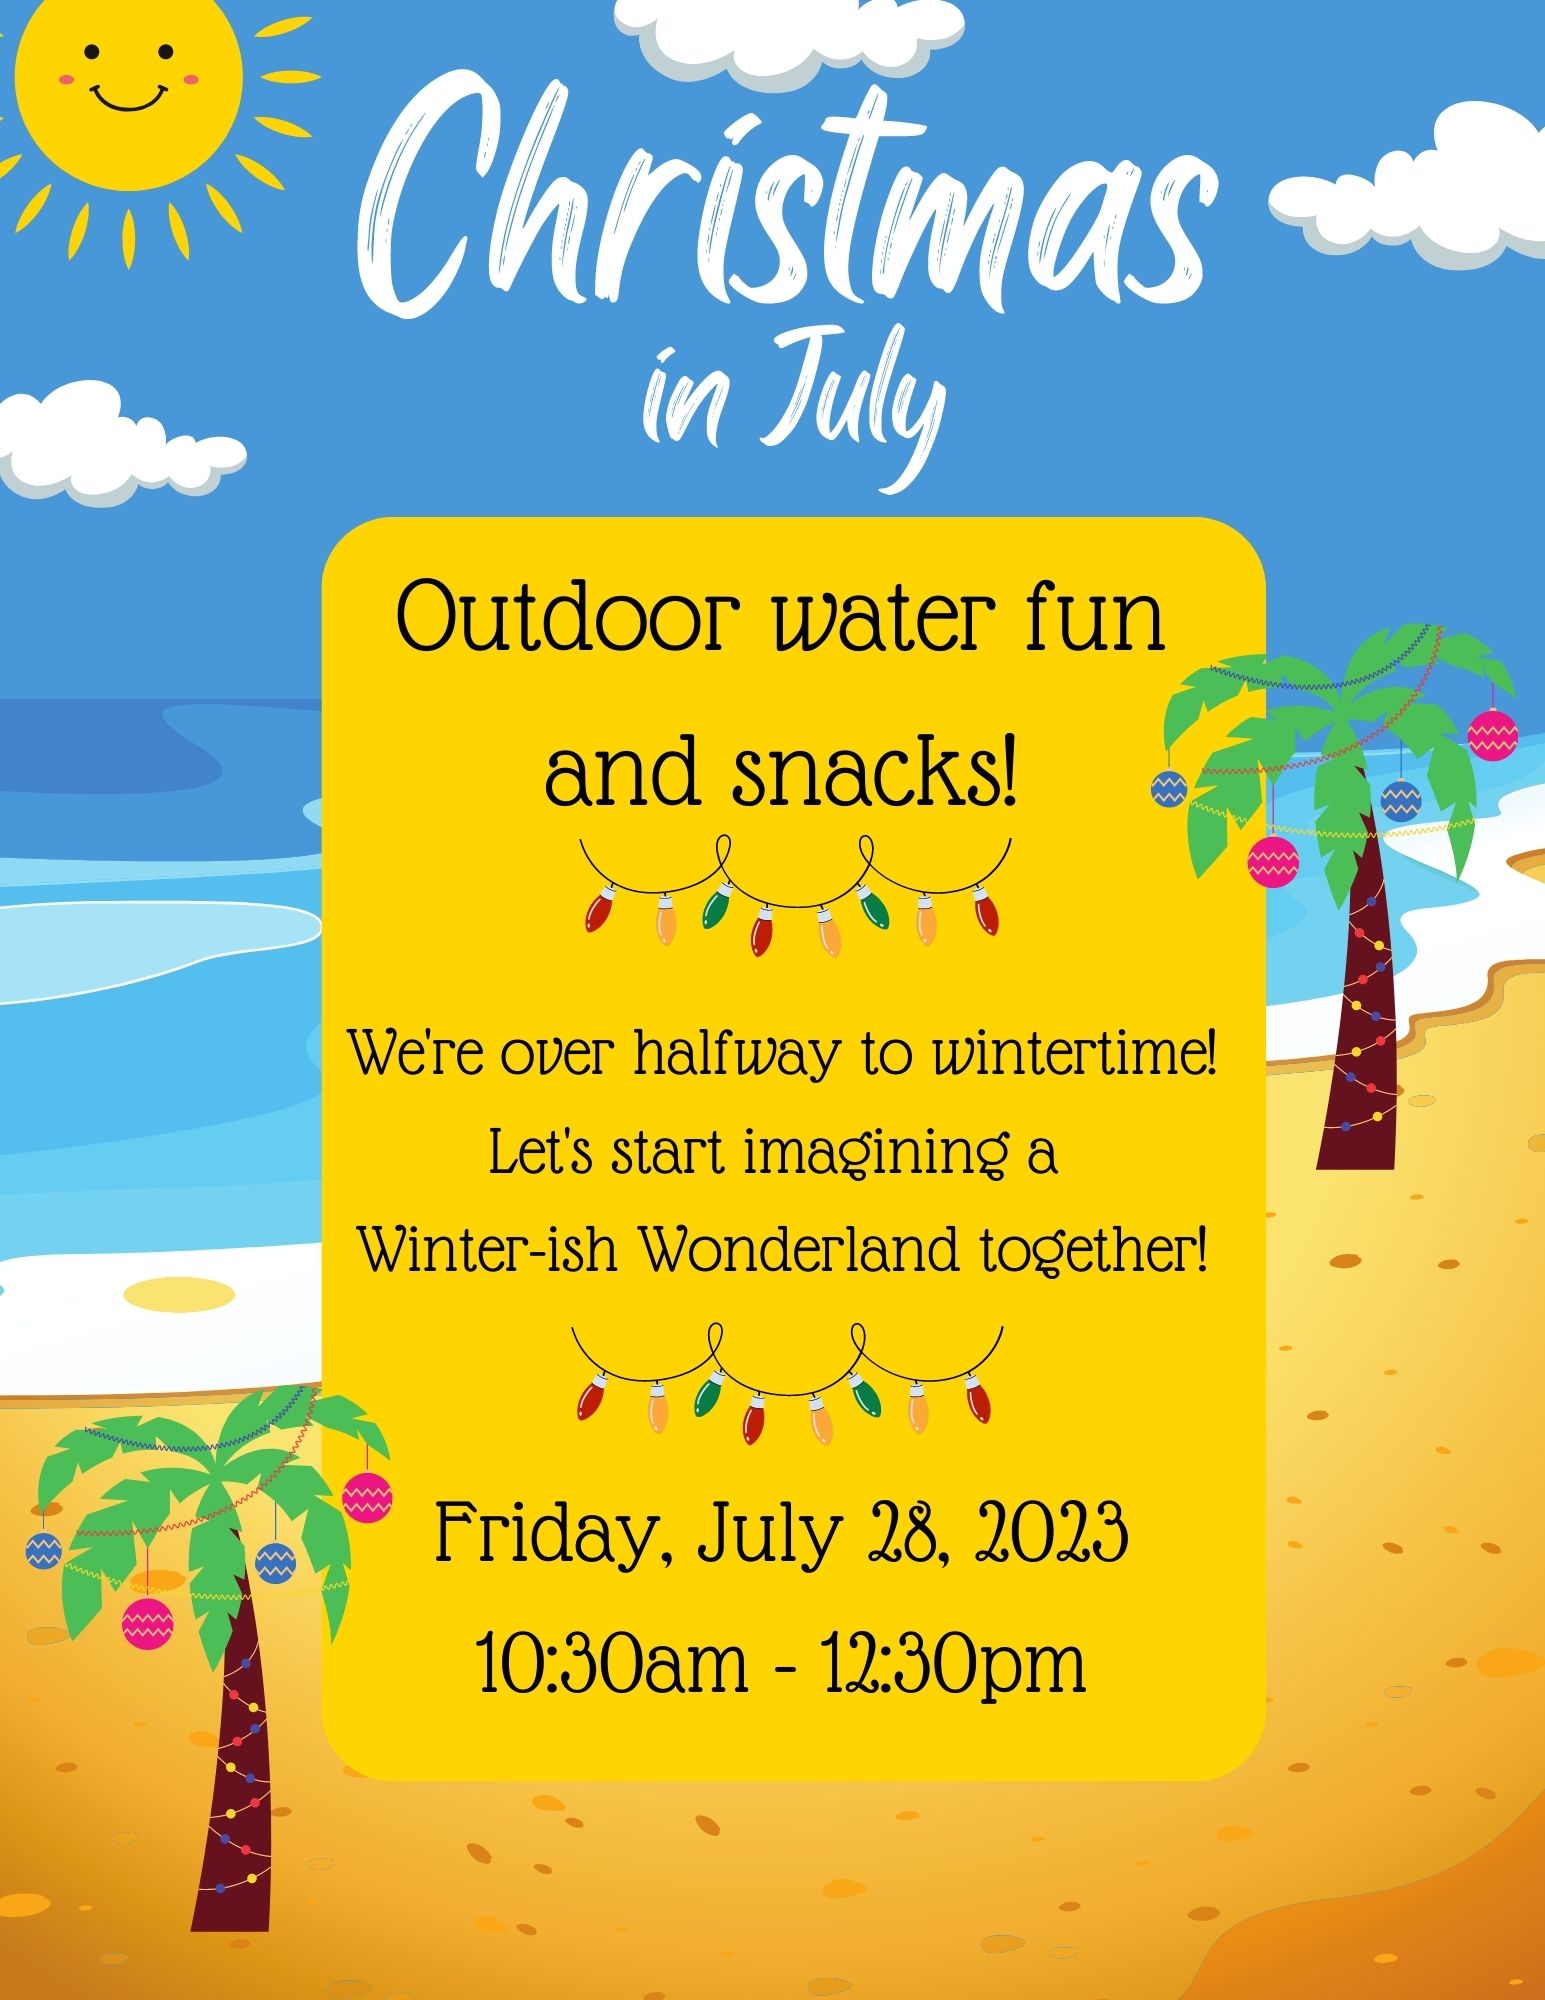 Christmas in July Party July 28 10:30am to 12:30pm